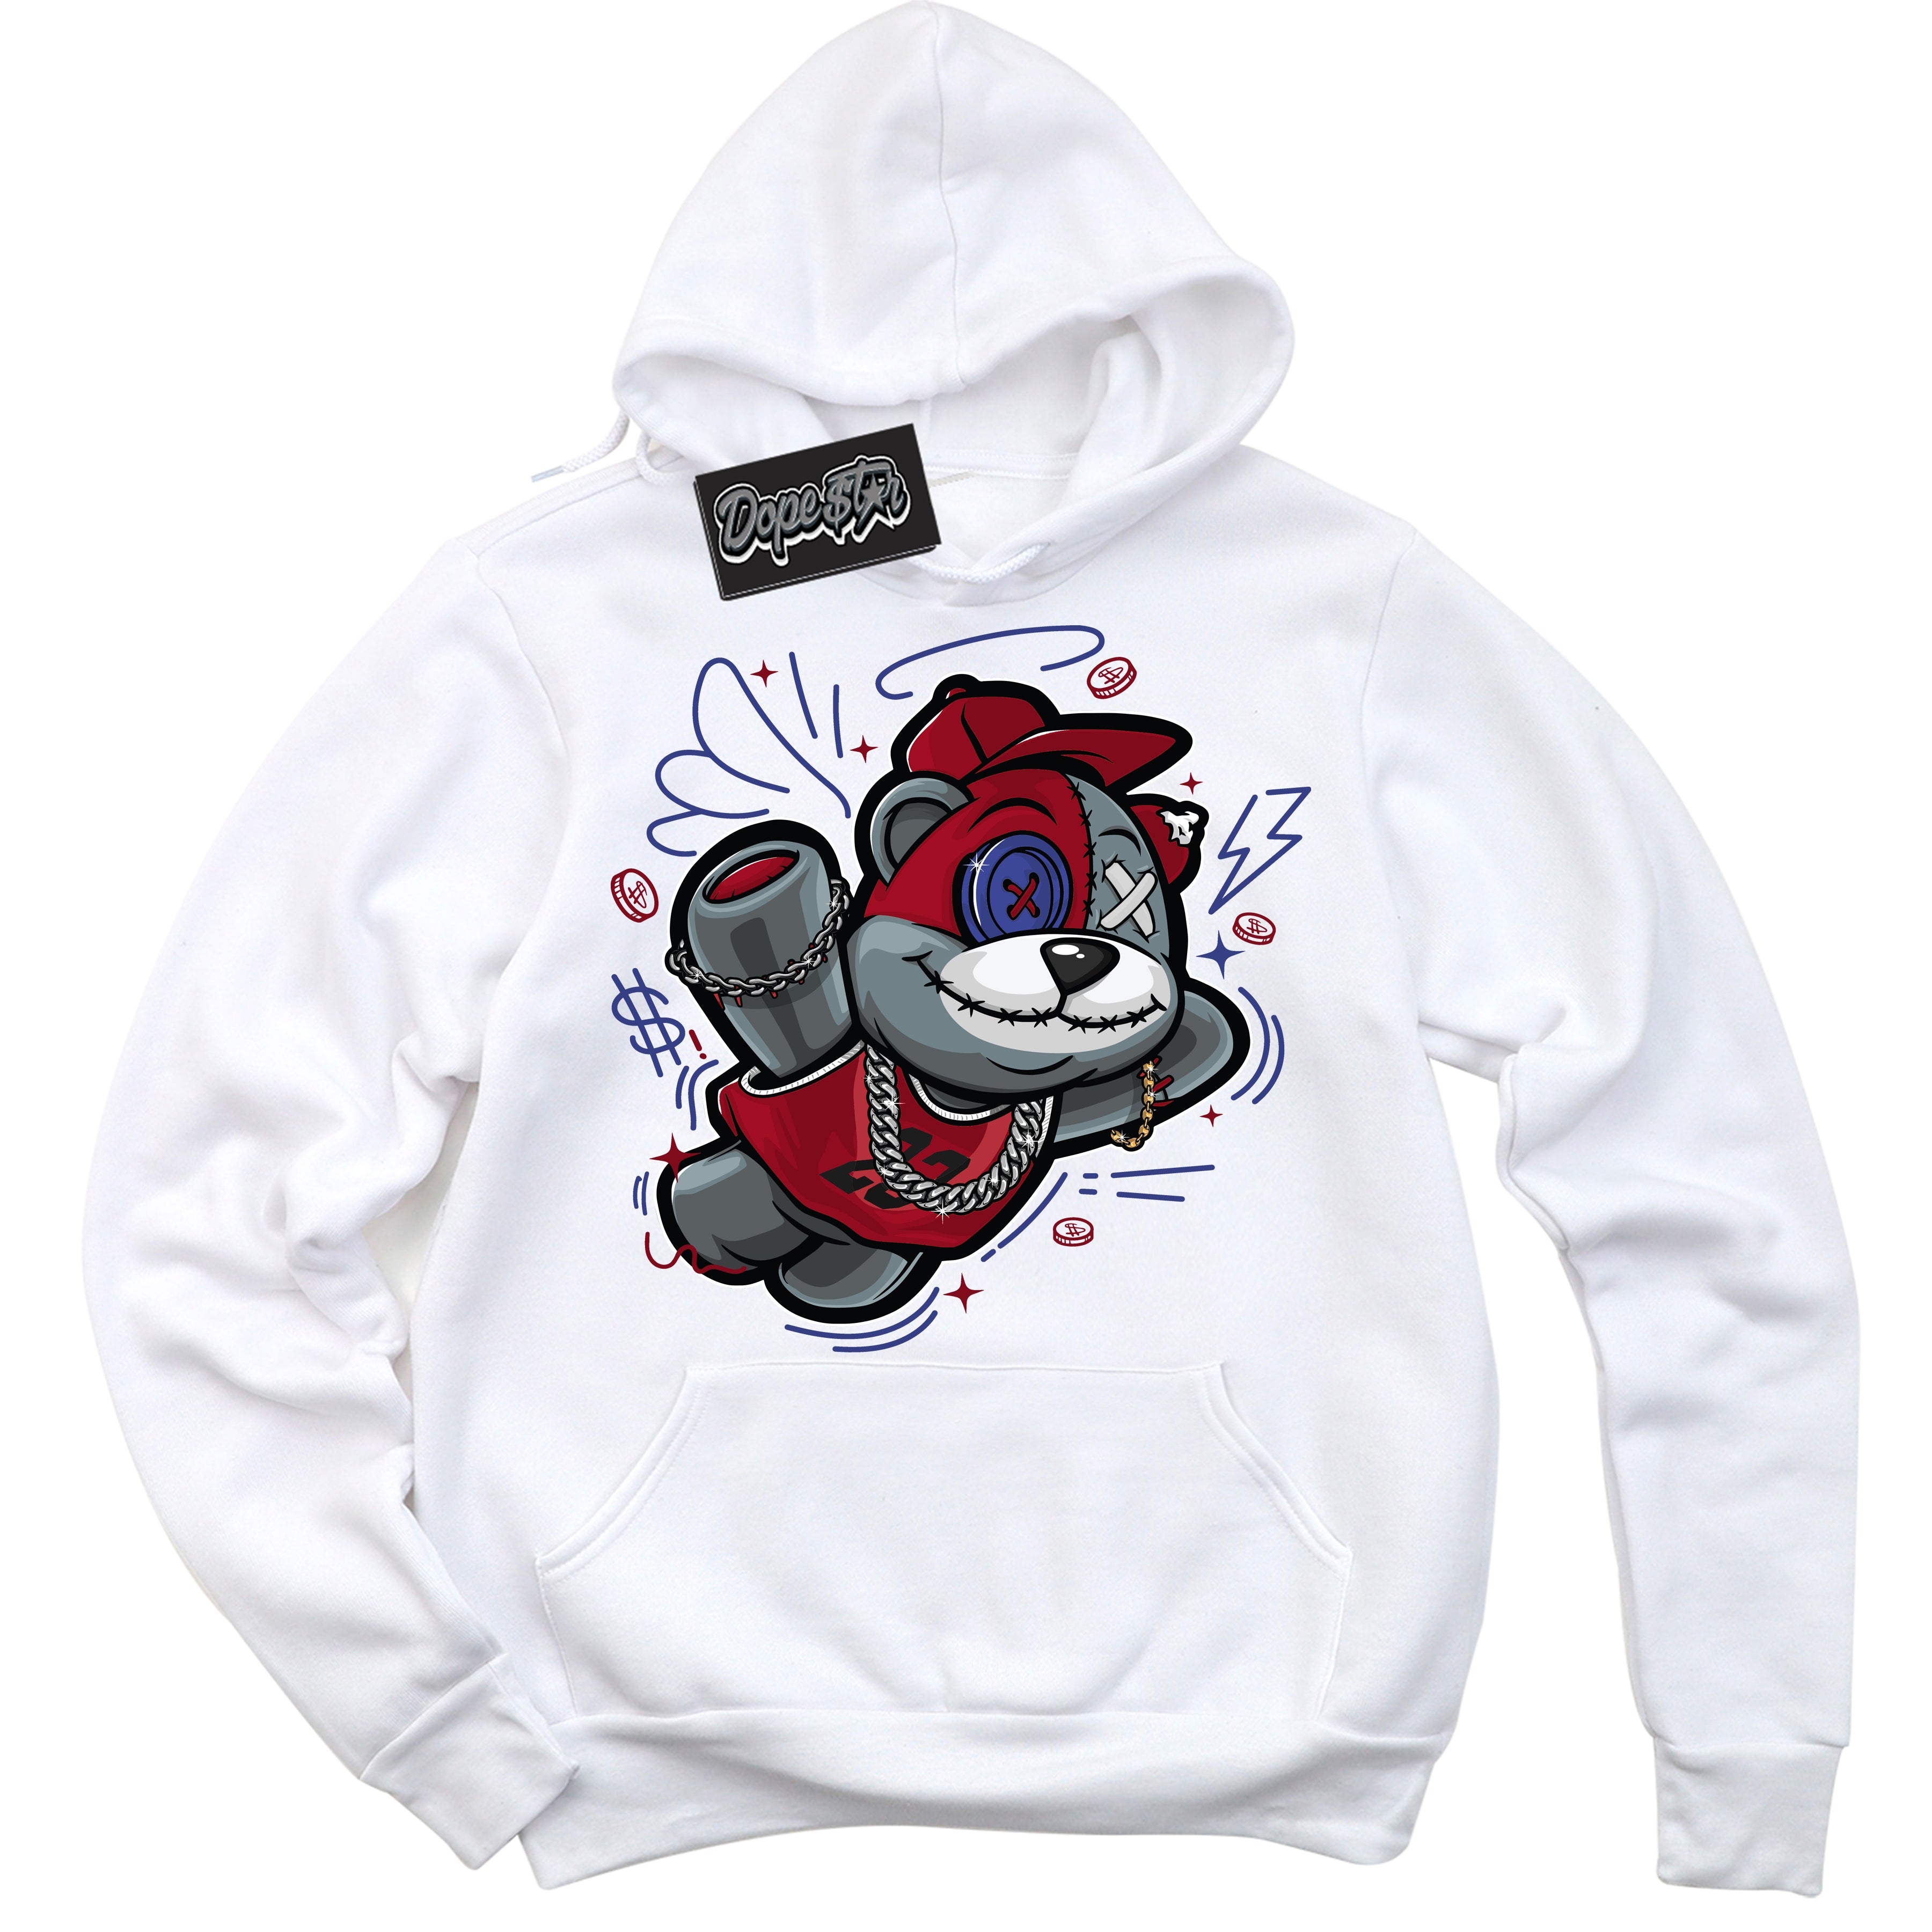 Cool White Hoodie with “ Slam Dunk Bear ”  design that Perfectly Matches Playoffs 8s Sneakers.